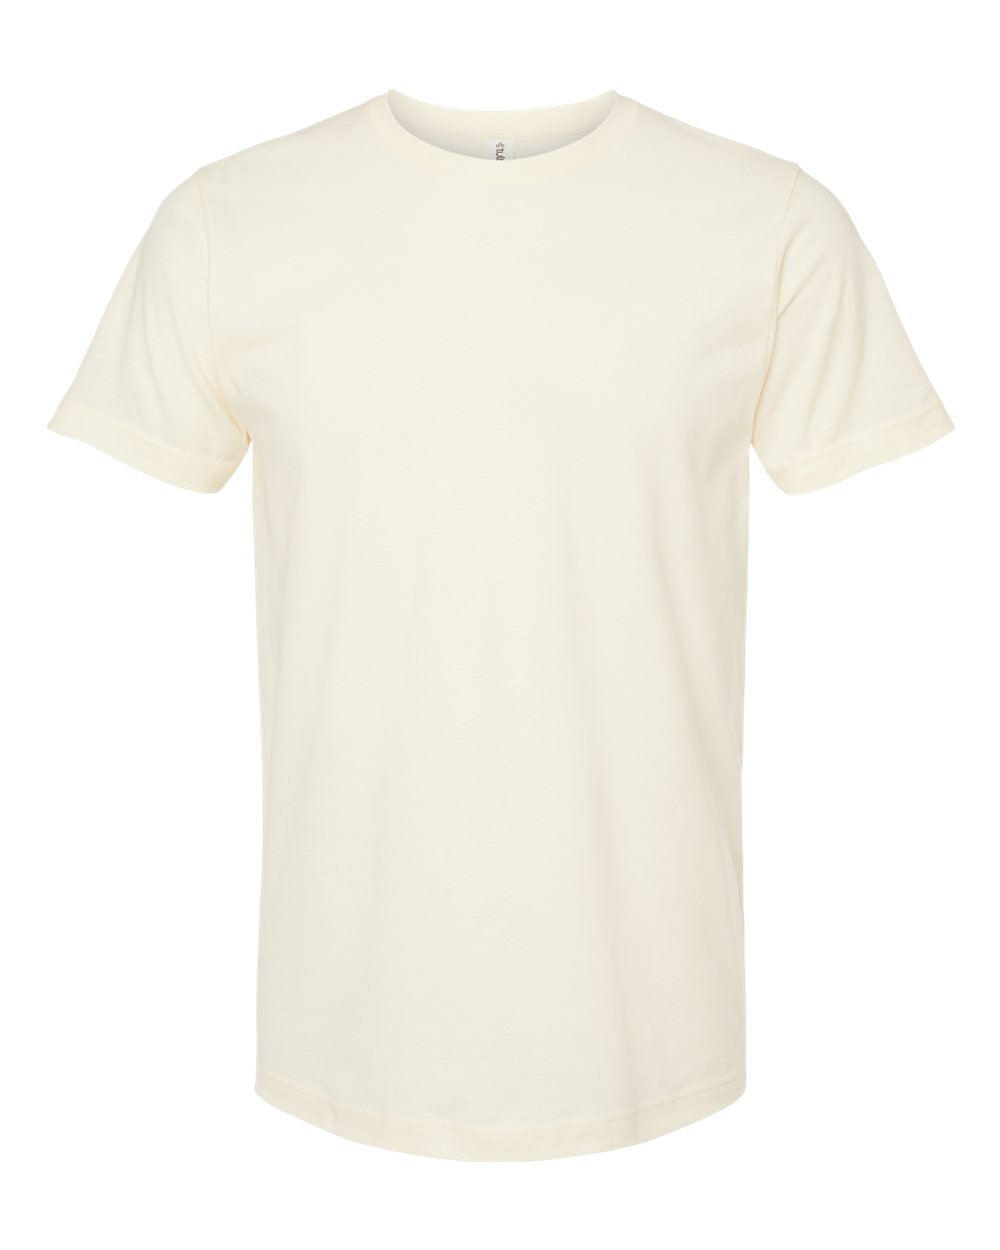 Tultex Unisex Tee (202) in Natural